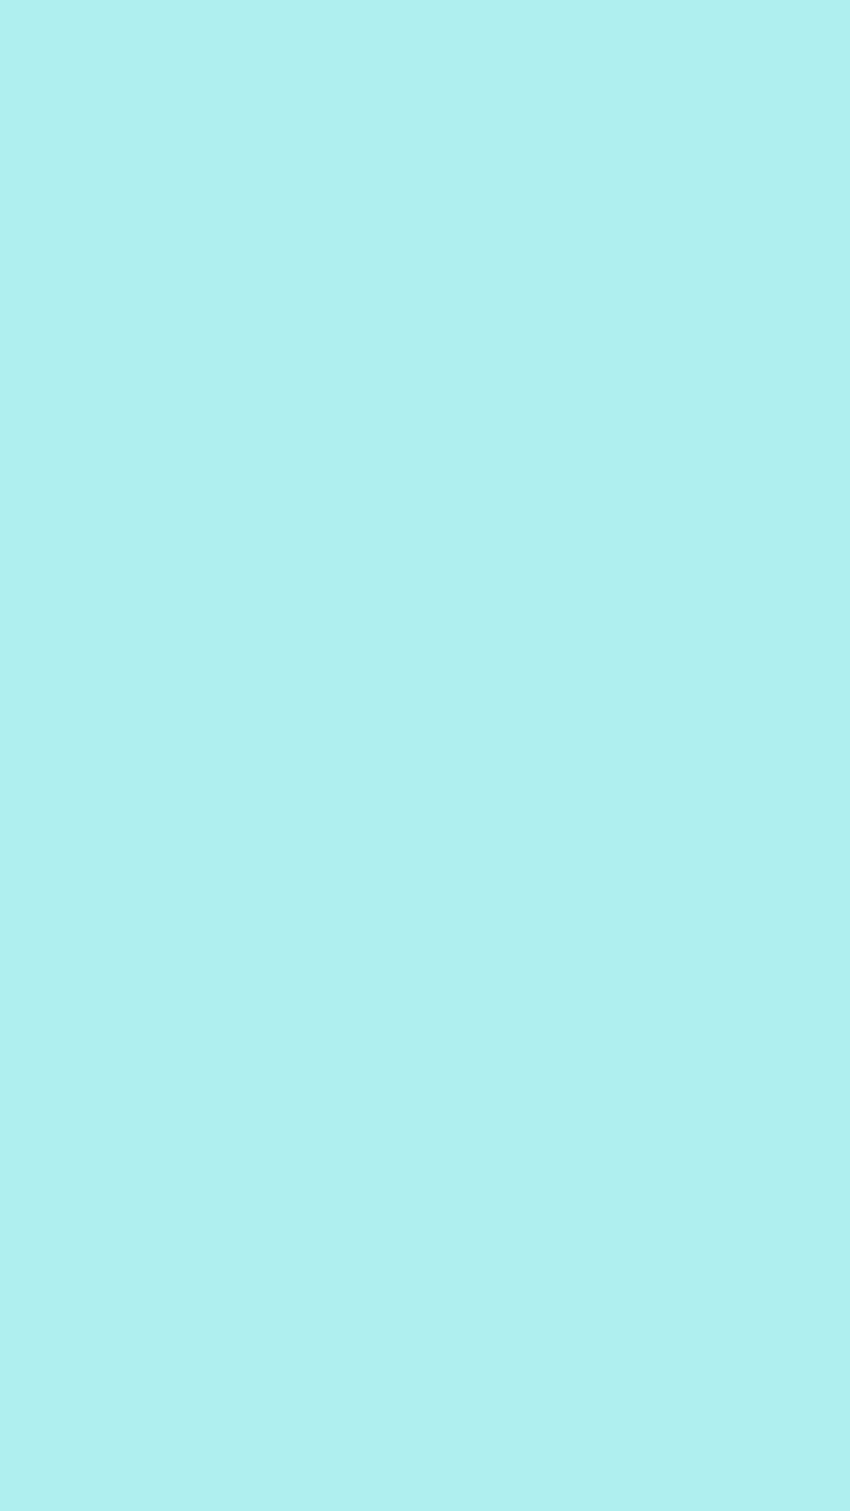 Pale Turquoise Solid Color Backgrounds for Mobile Phone, solid color phone HD phone wallpaper